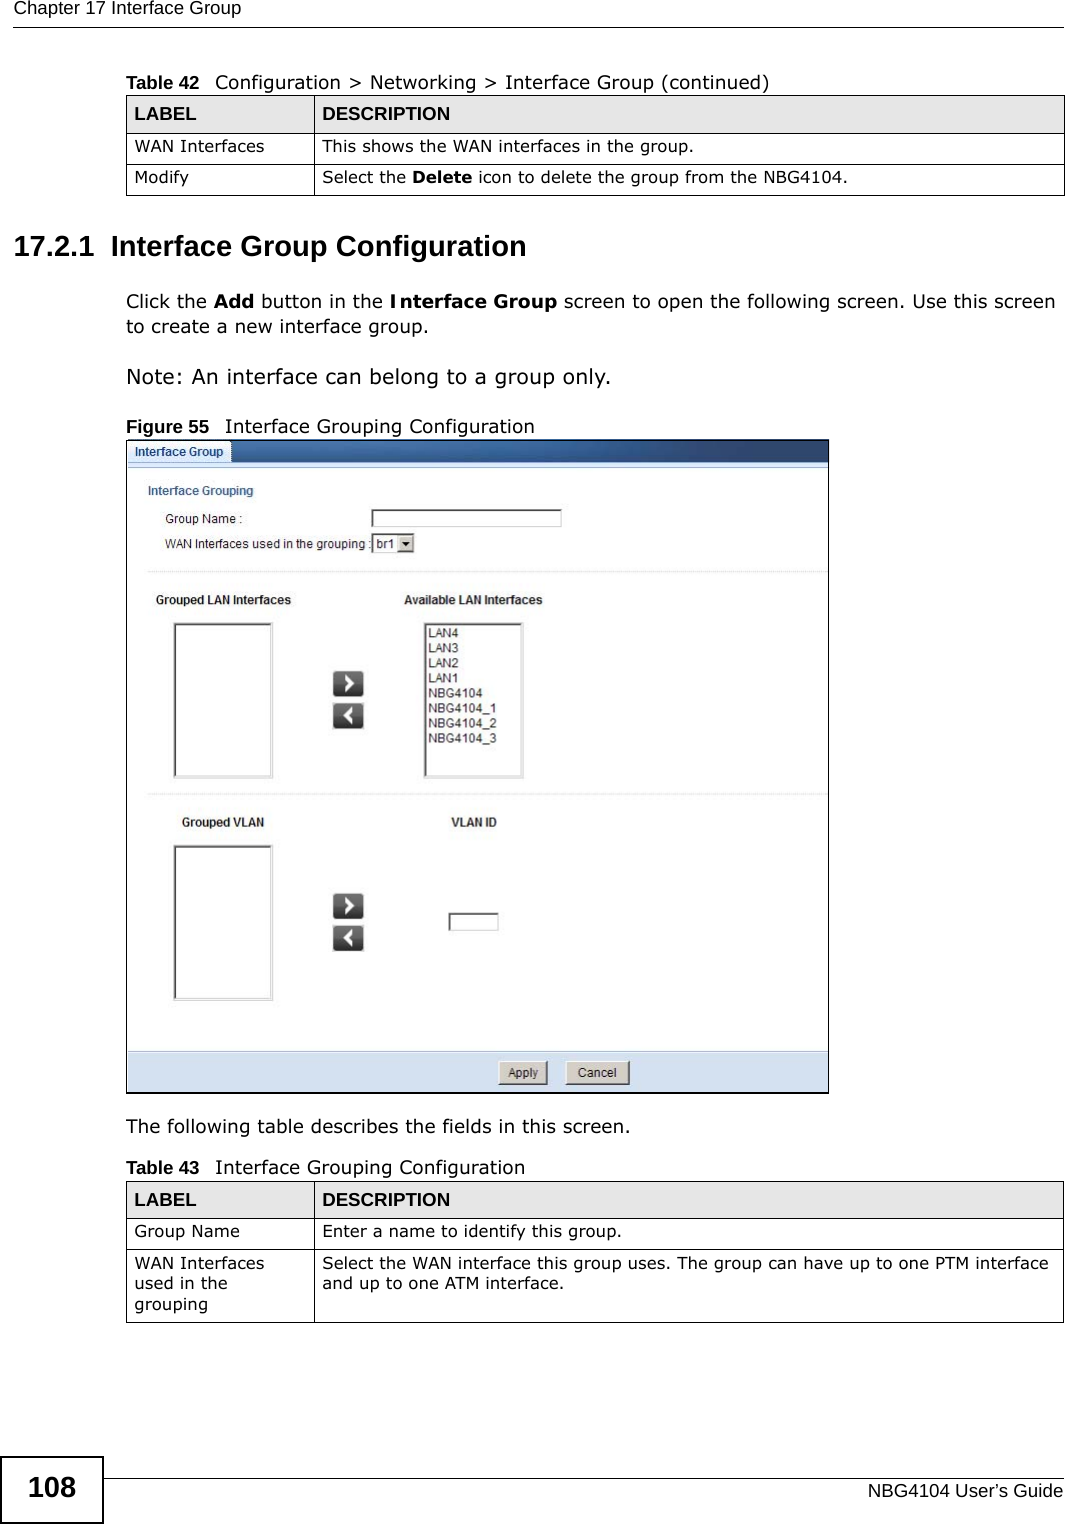 Chapter 17 Interface GroupNBG4104 User’s Guide10817.2.1  Interface Group ConfigurationClick the Add button in the Interface Group screen to open the following screen. Use this screen to create a new interface group. Note: An interface can belong to a group only.Figure 55   Interface Grouping Configuration The following table describes the fields in this screen. WAN Interfaces This shows the WAN interfaces in the group.Modify Select the Delete icon to delete the group from the NBG4104.Table 42   Configuration &gt; Networking &gt; Interface Group (continued)LABEL DESCRIPTIONTable 43   Interface Grouping ConfigurationLABEL DESCRIPTIONGroup Name Enter a name to identify this group.WAN Interfaces used in the groupingSelect the WAN interface this group uses. The group can have up to one PTM interface and up to one ATM interface.